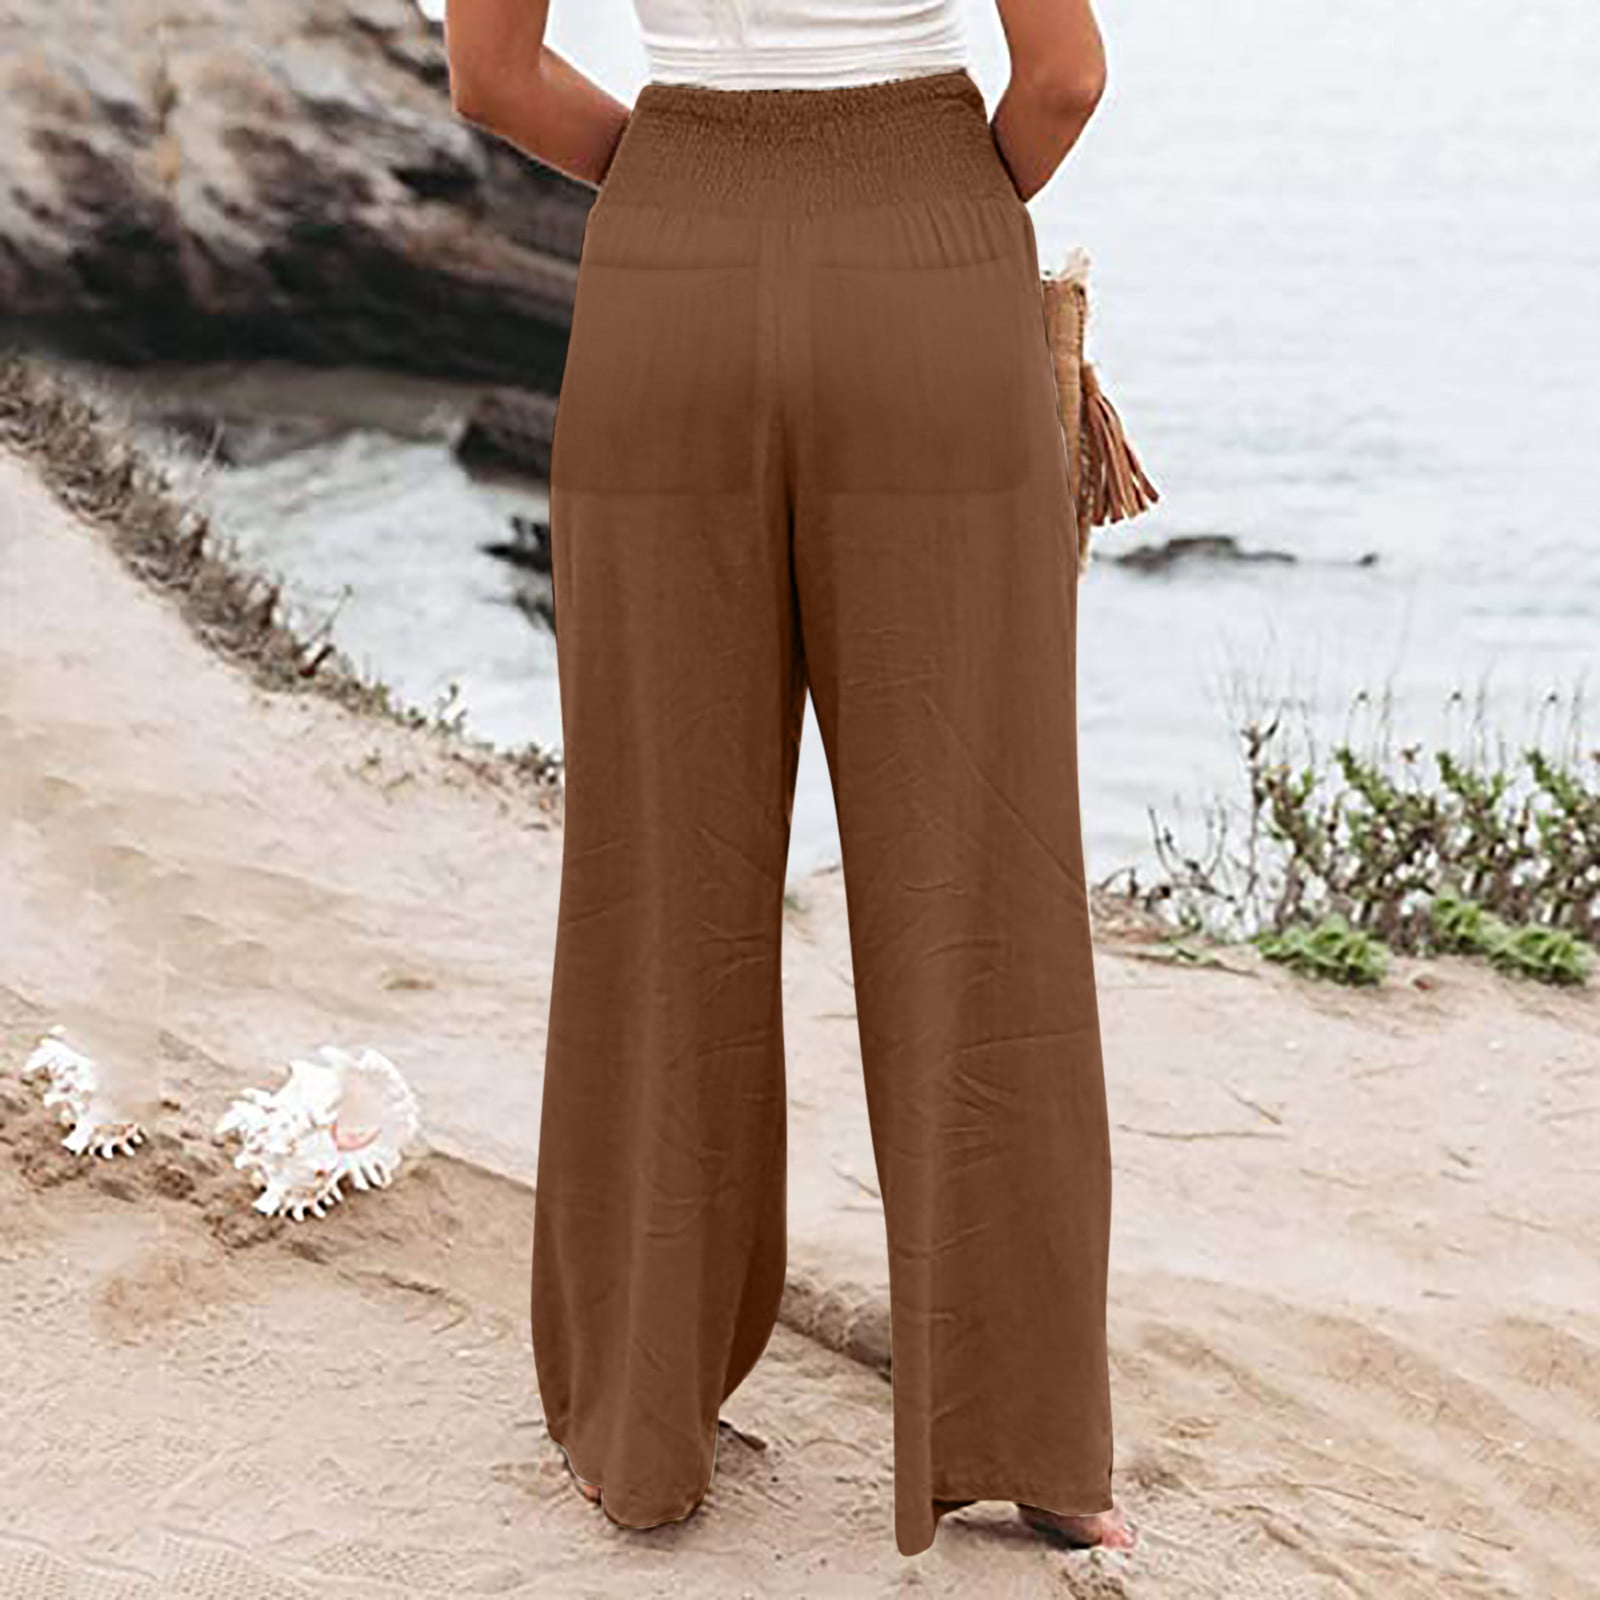 SELONE Linen Pants for Women Petite Drawstring With Pockets Plus Size Baggy  Elastic Waist Casual Long Pant Fashion Solid Loose Pants for Everyday Wear  Running Work Casual Event Khaki M 